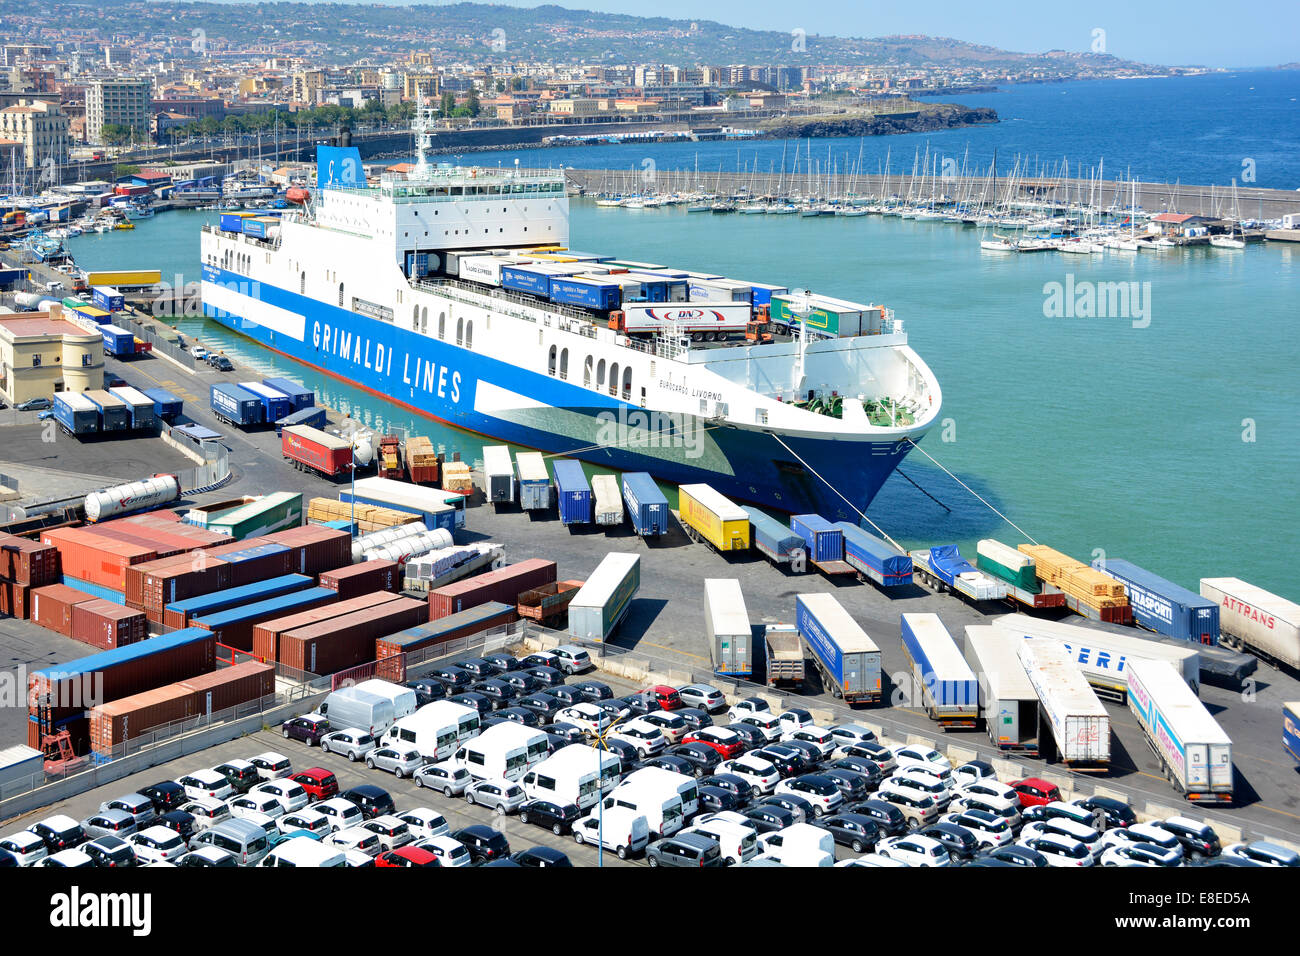 Aerial view new cars & vans port business dockside jetty Grimaldi Lines "Eurocargo Livorno" top deck loading lorry truck trailers Sicily Italy Stock Photo Alamy